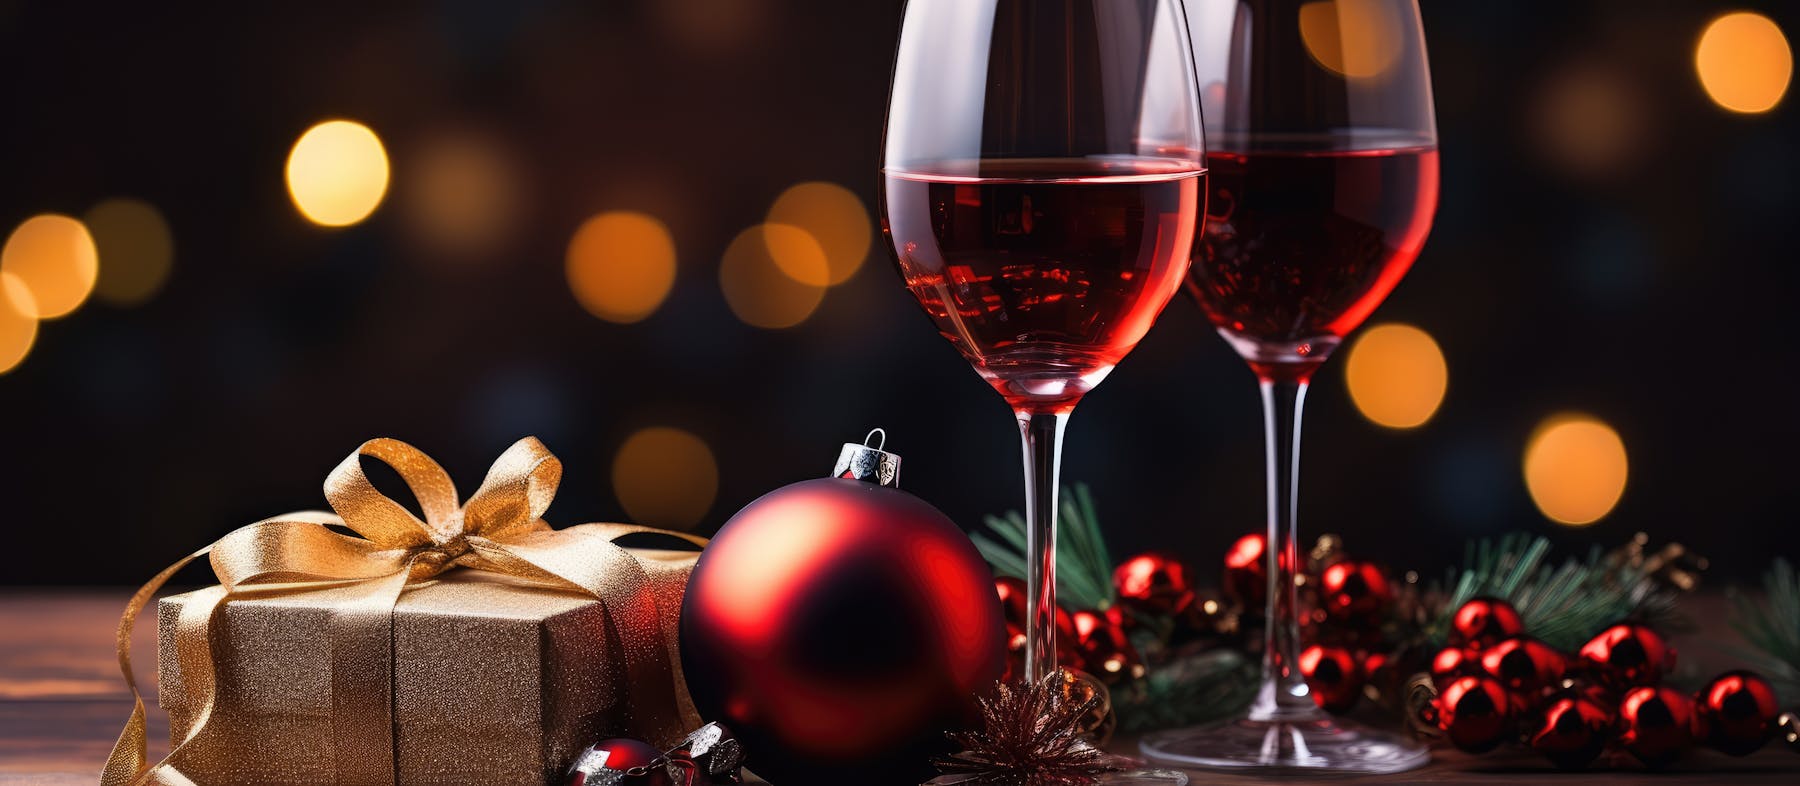 Discover 10 exceptional wines to give as gifts to express your gratitude to your customers and strengthen your business relationships this Christmas.